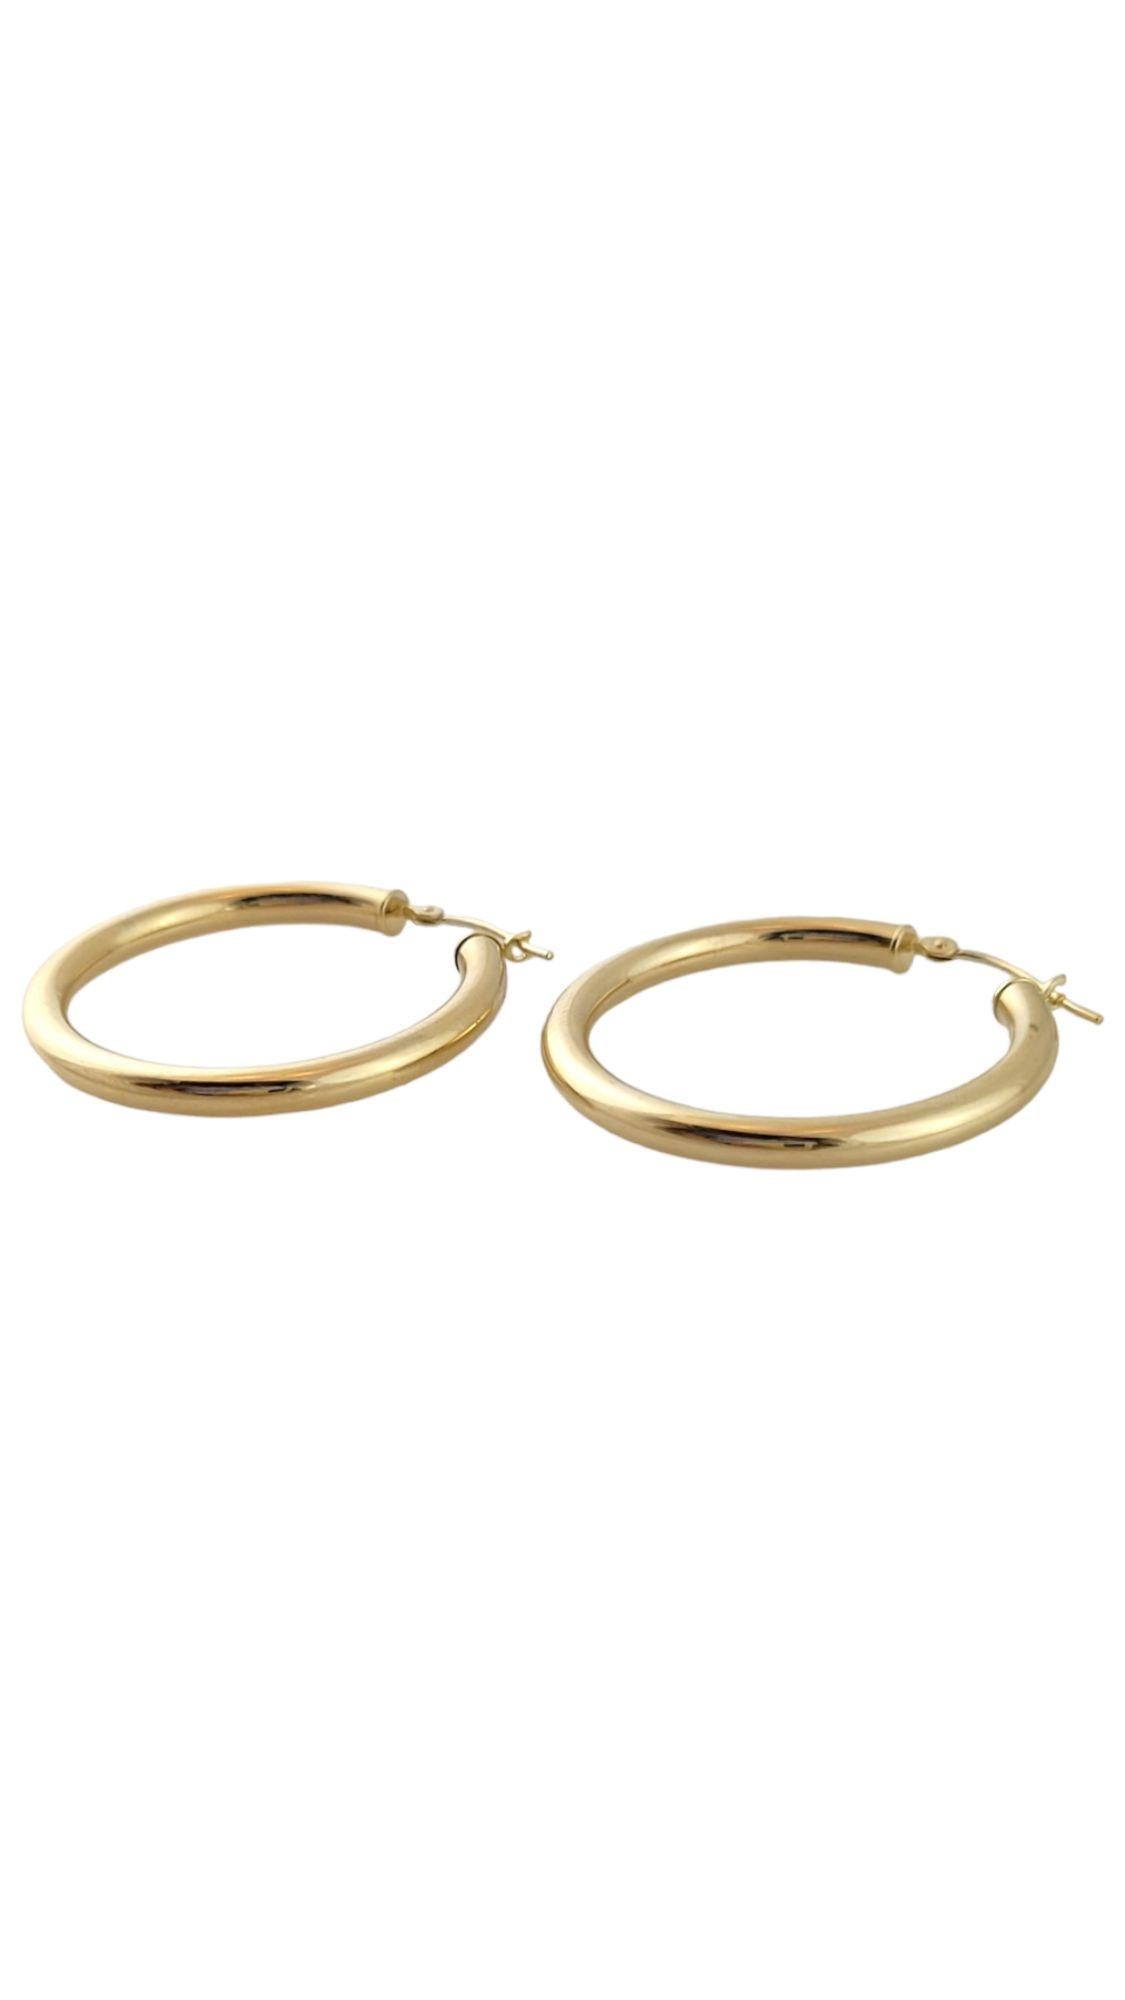 This classic set of 14K gold hoops are simple yet beautiful!

Size: 31.2mm X 30.2mm X 3mm

Weight: 2.1 g/ 1.4 dwt

Hallmark: 14K MB

Very good condition, professionally polished.

Will come packaged in a gift box or pouch (when possible) and will be